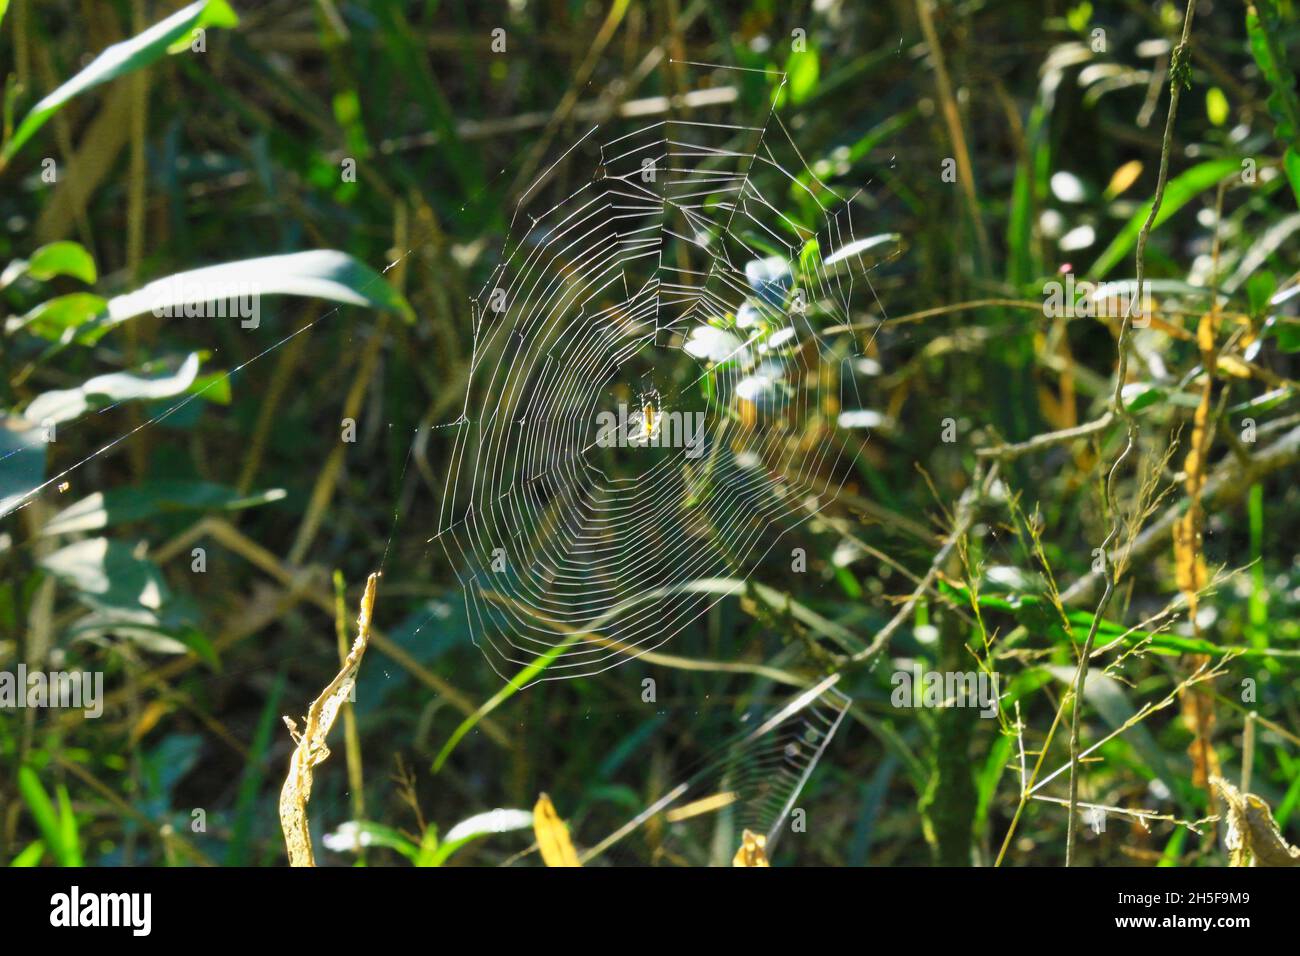 Spider's Web, one of nature's most intriguing elements. In the Atlantica forest, among the immensity of leaves, a spider's web shines. Stock Photo